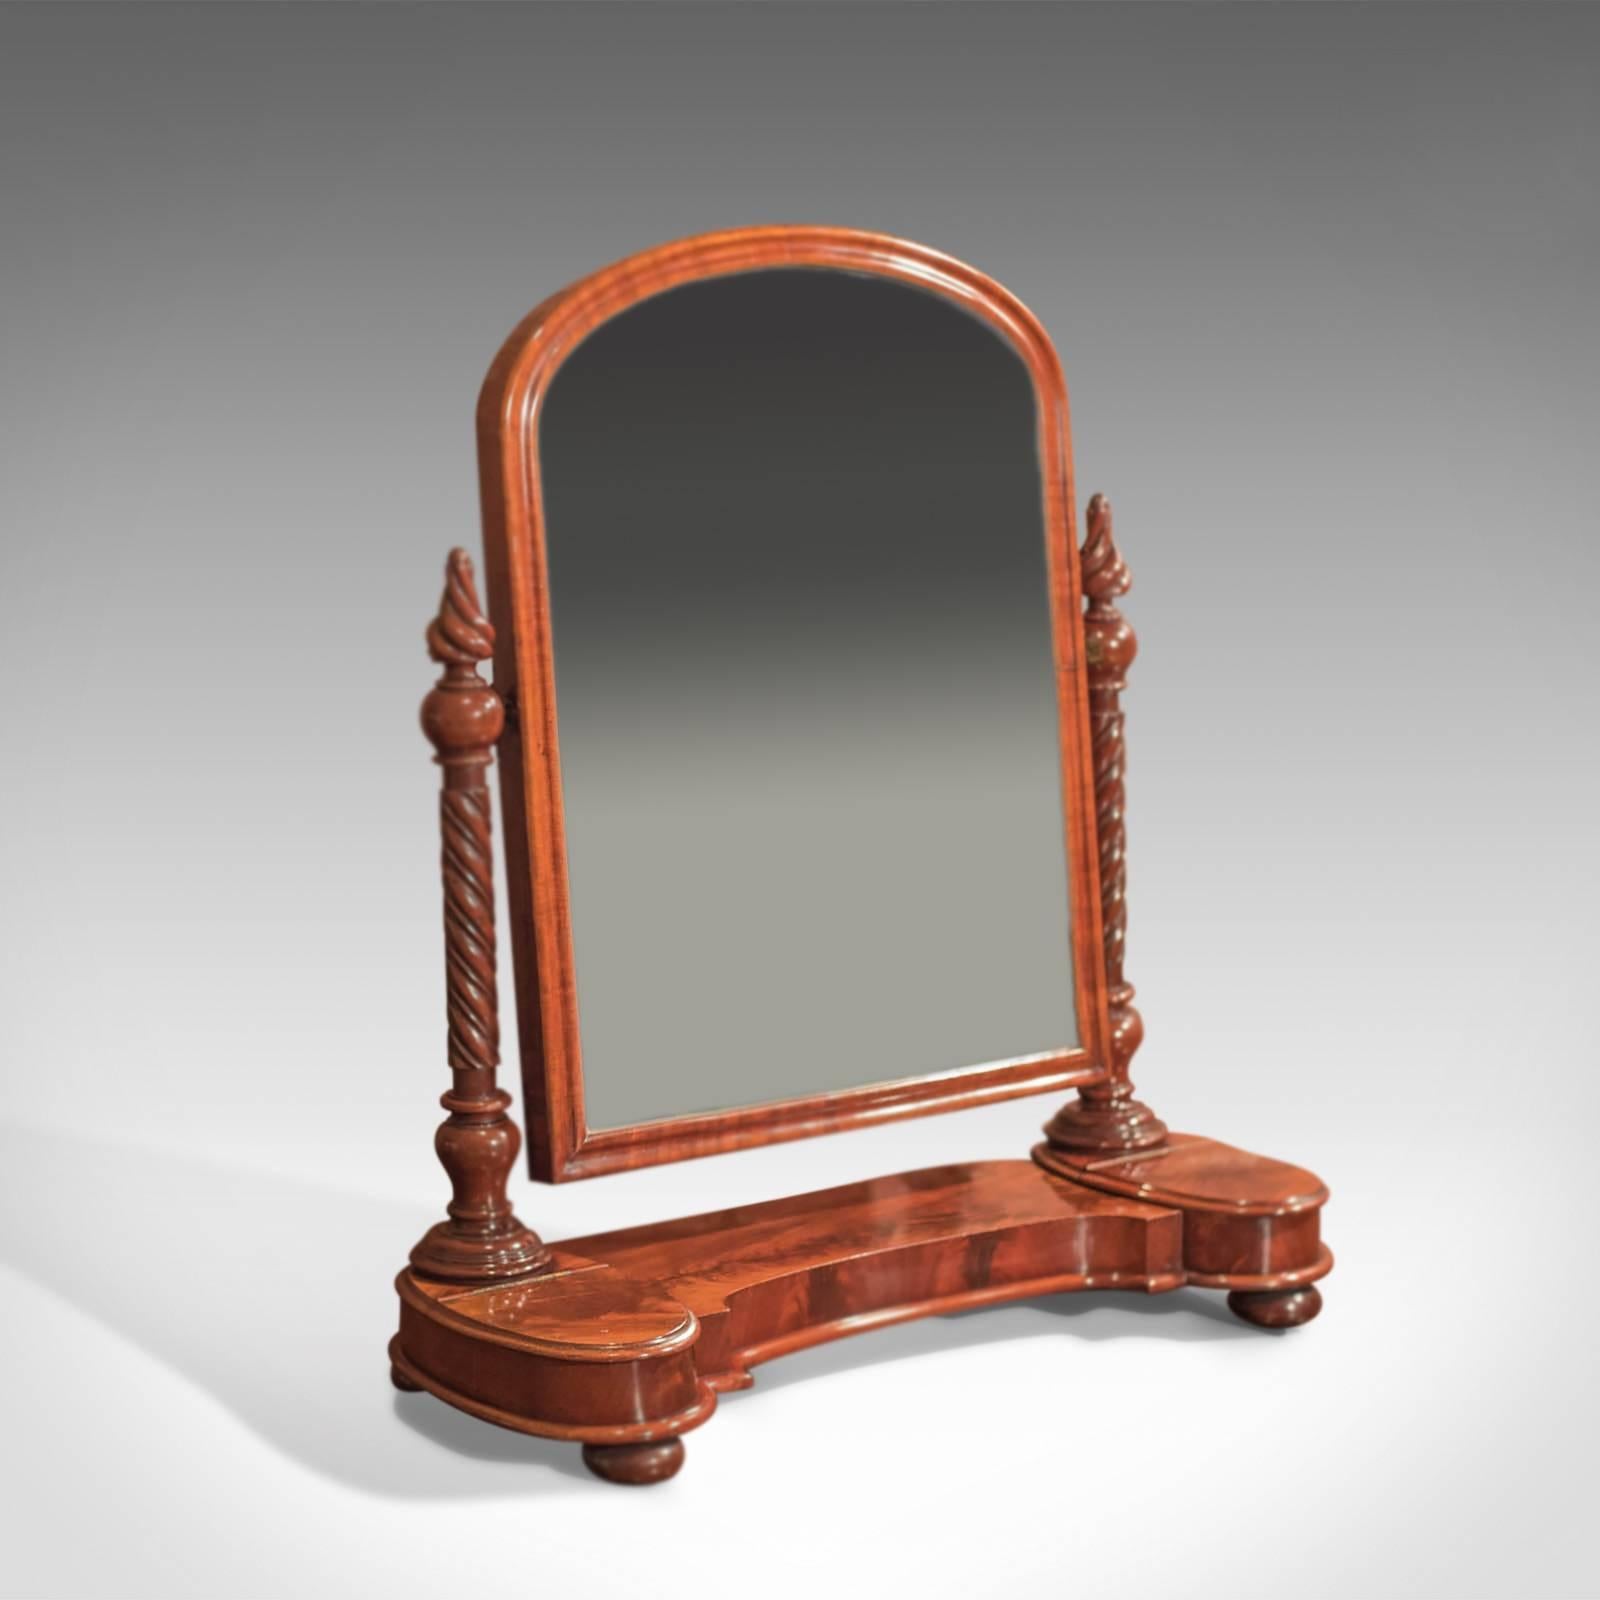 This is an antique, Regency vanity mirror dating to circa 1820.

Raised on squat bun feet, the shaped platform is flanked by a pair of ovular, hinged lid, velvet lined jewelry compartments. The flame mahogany displaying the most wonderful grain